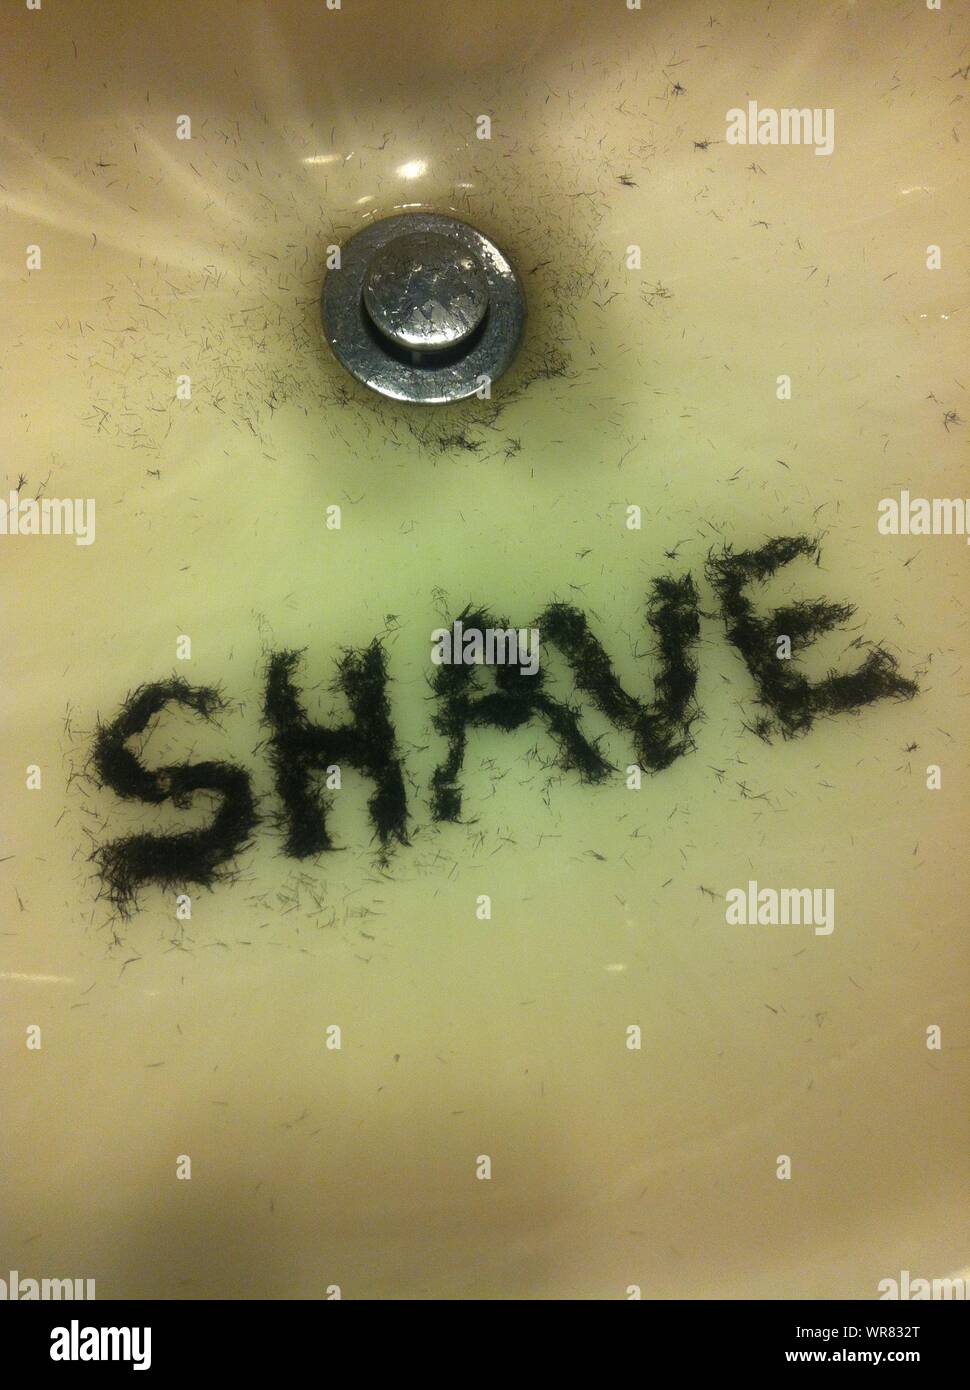 High Angle View Of Shave Text Made By Hair In Bathroom Sink Stock Photo